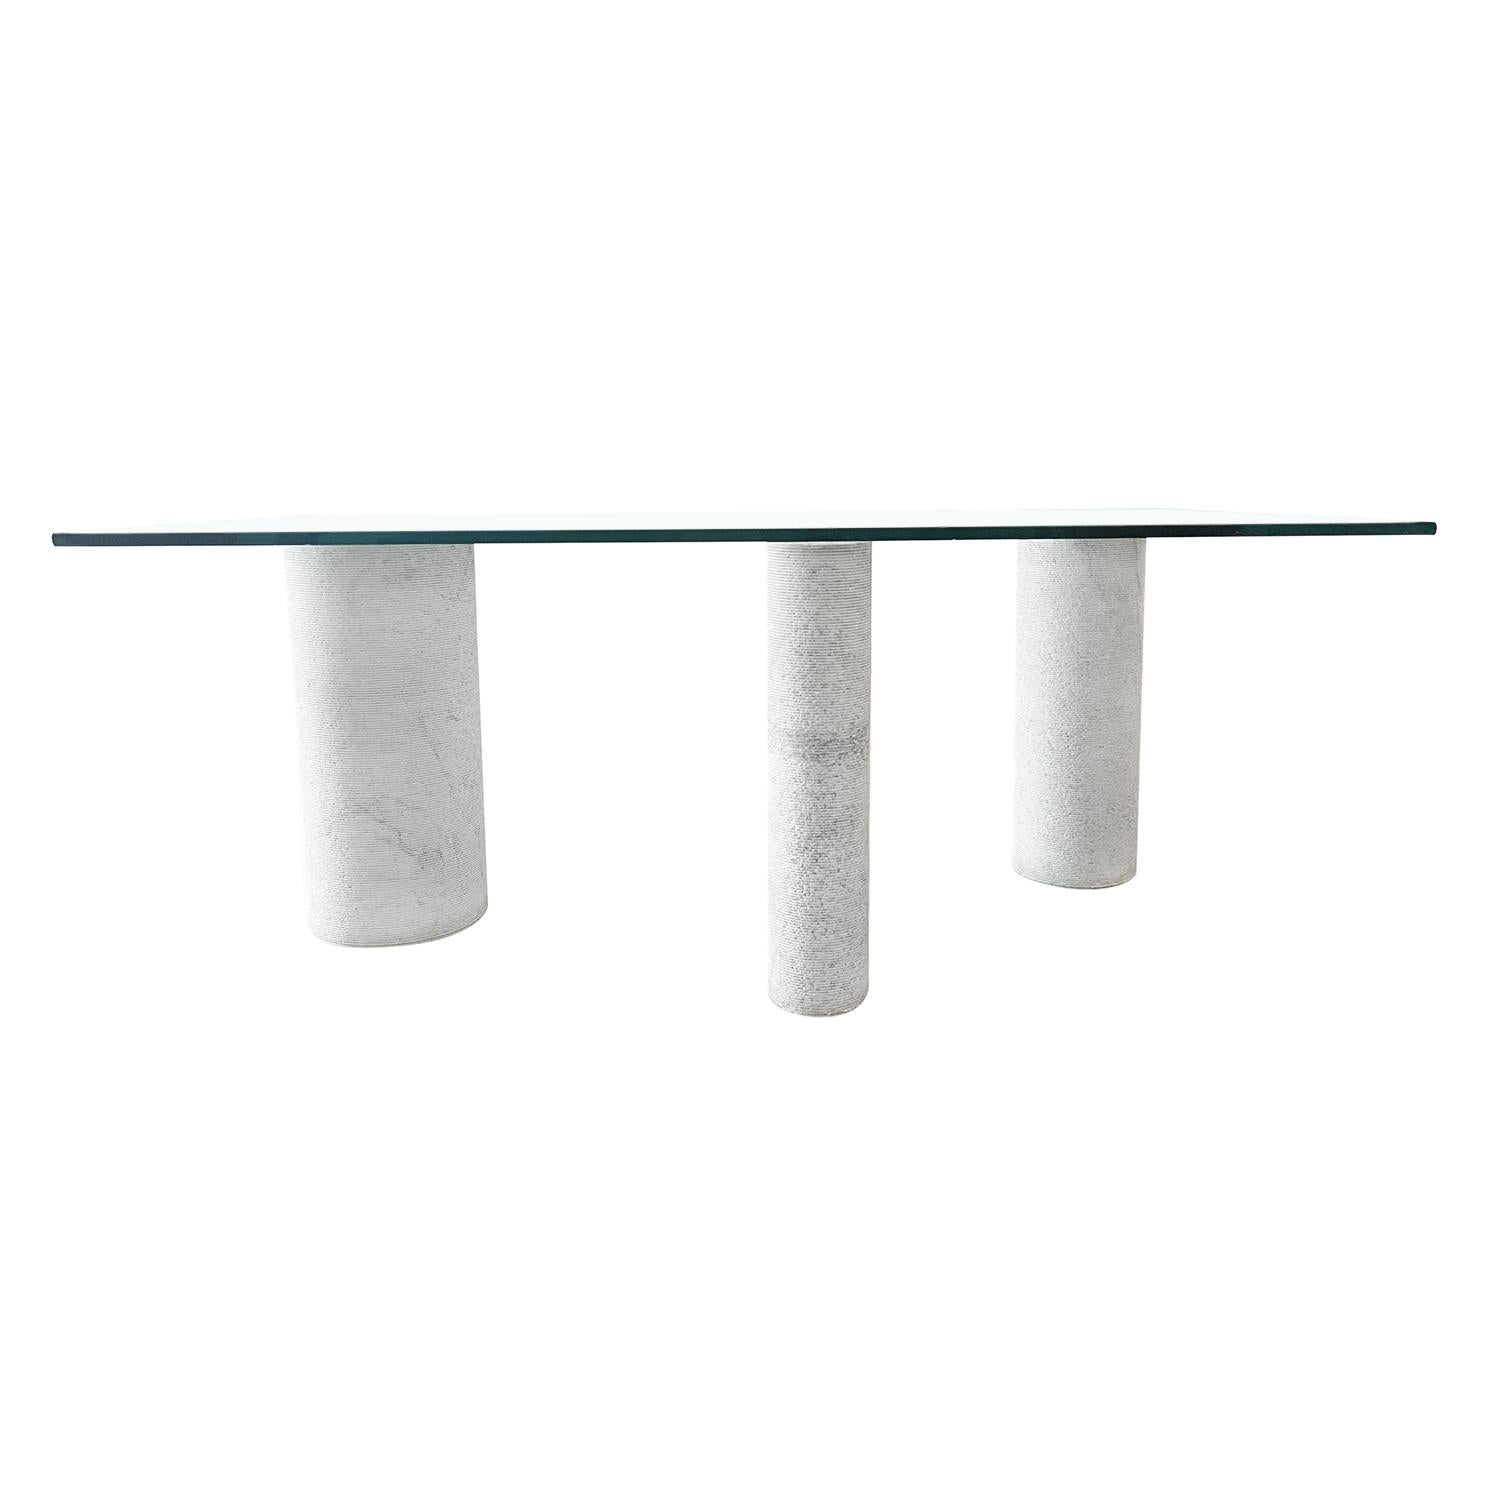 A white-grey, vintage Mid-Century Modern Italian large dining table made of hand crafted marble, designed by Massimo Vignelli in good condition. The sculptural table is consisting a thick glass top, supported by three cylindrical bases of different